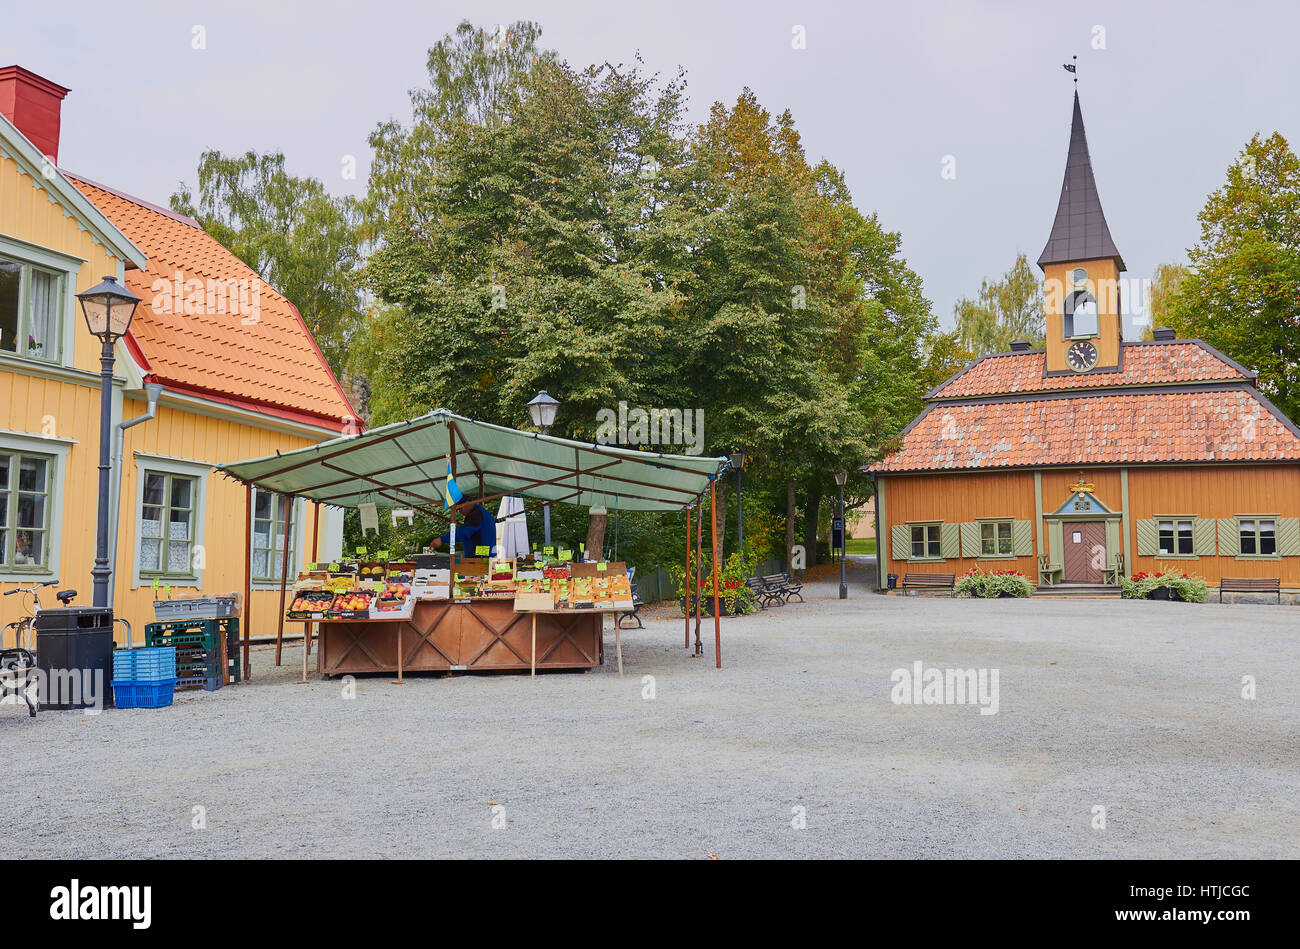 Sigtuna town hall, designed in the 1740's, and fresh fruit stall, Sigtuna, Stockholm County, Sweden, Scandinavia Stock Photo